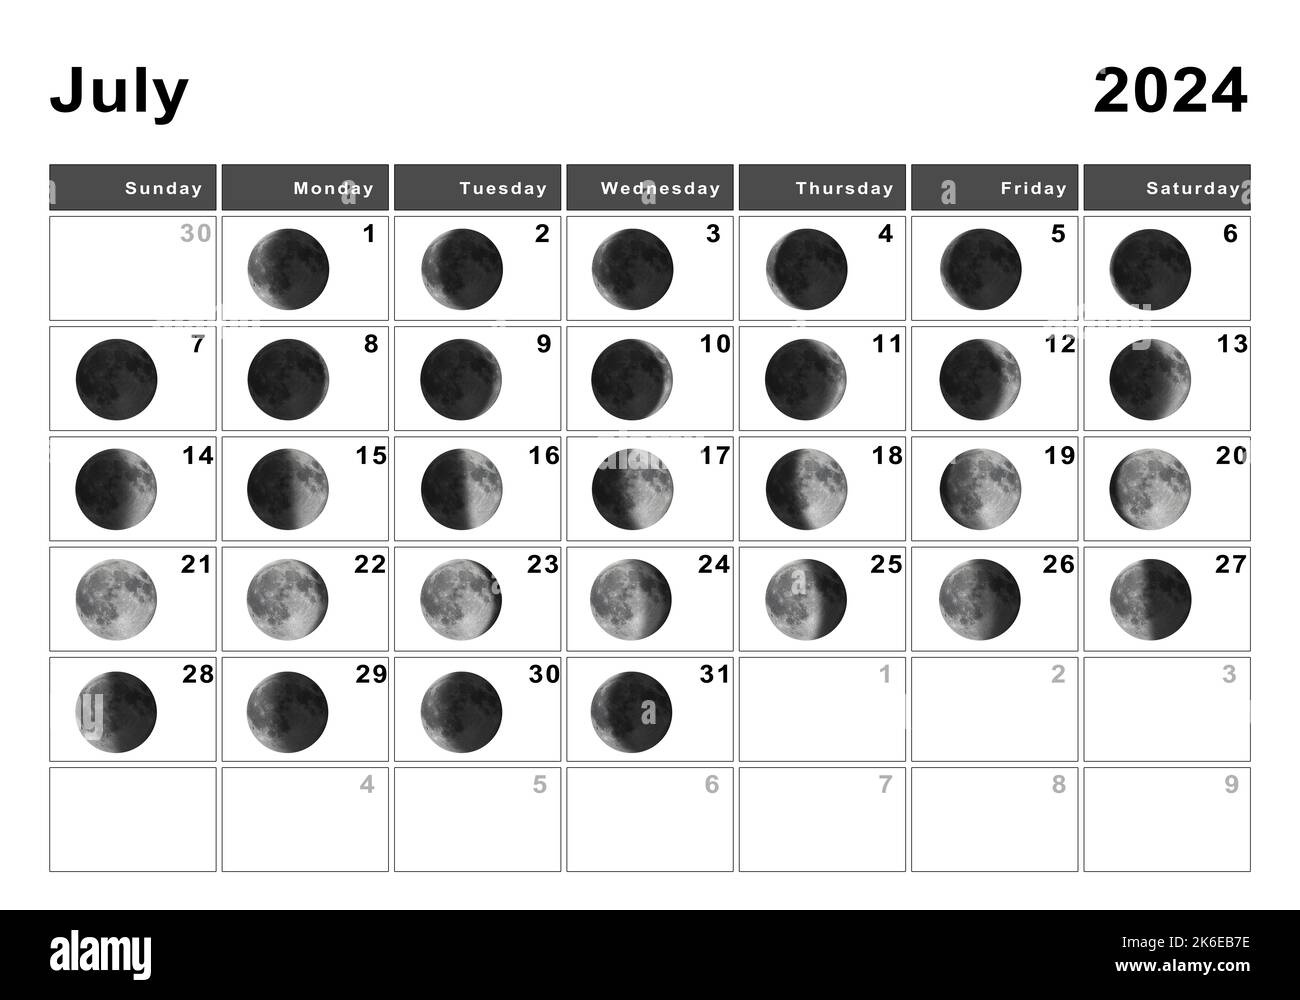 July 2024 Lunar Calendar, Moon Cycles, Moon Phases Stock Photo - Alamy in 2024 July Moon Calendar